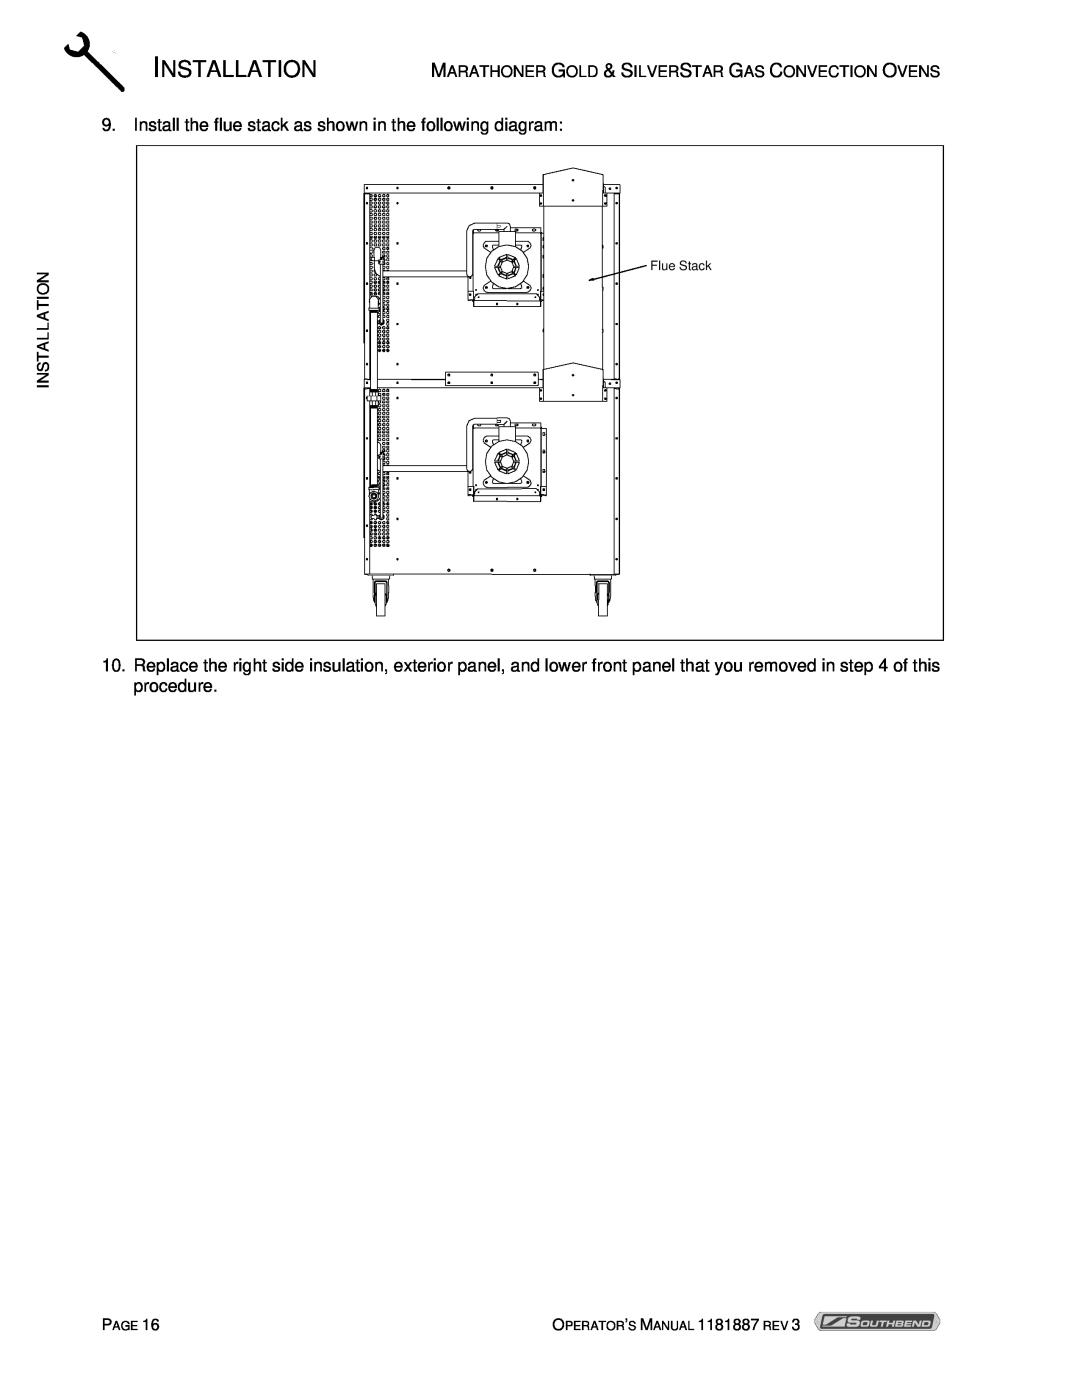 Southbend Marathoner manual Installation, Install the flue stack as shown in the following diagram, Flue Stack, Page 